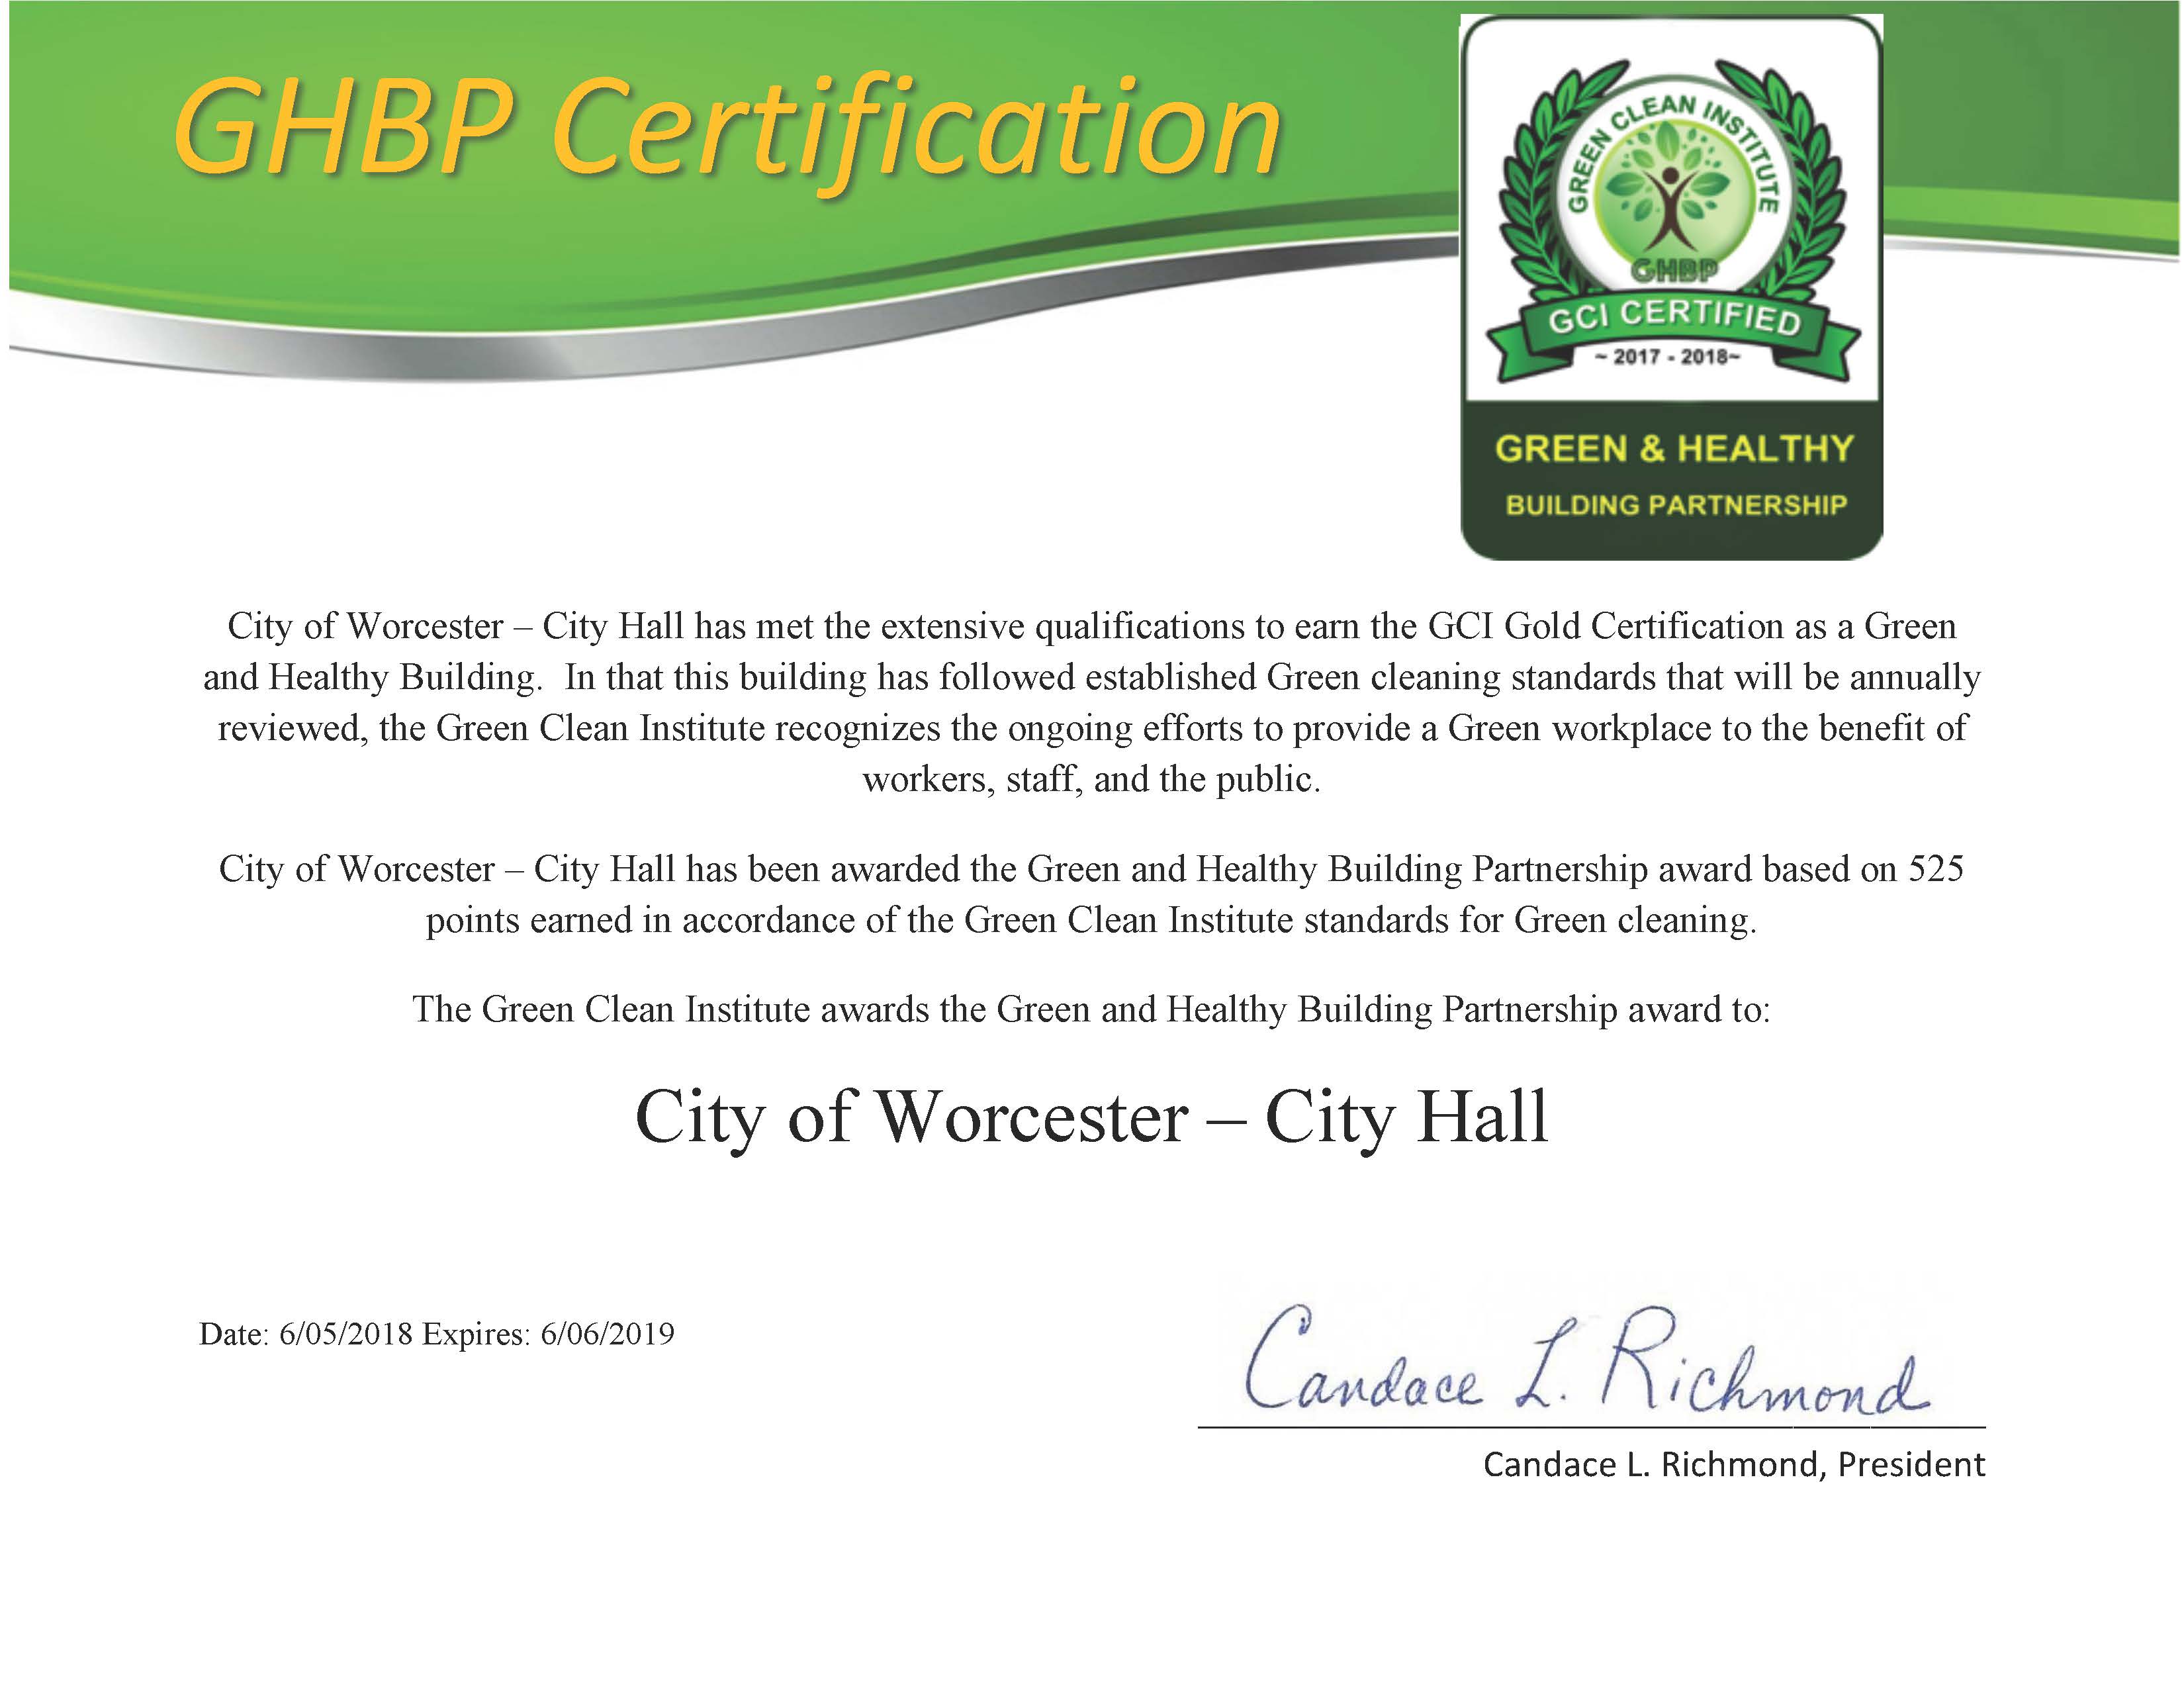 Worcester City Hall's Green Clean Institute’s certification as a Green and Healthy Building (2018-2019)